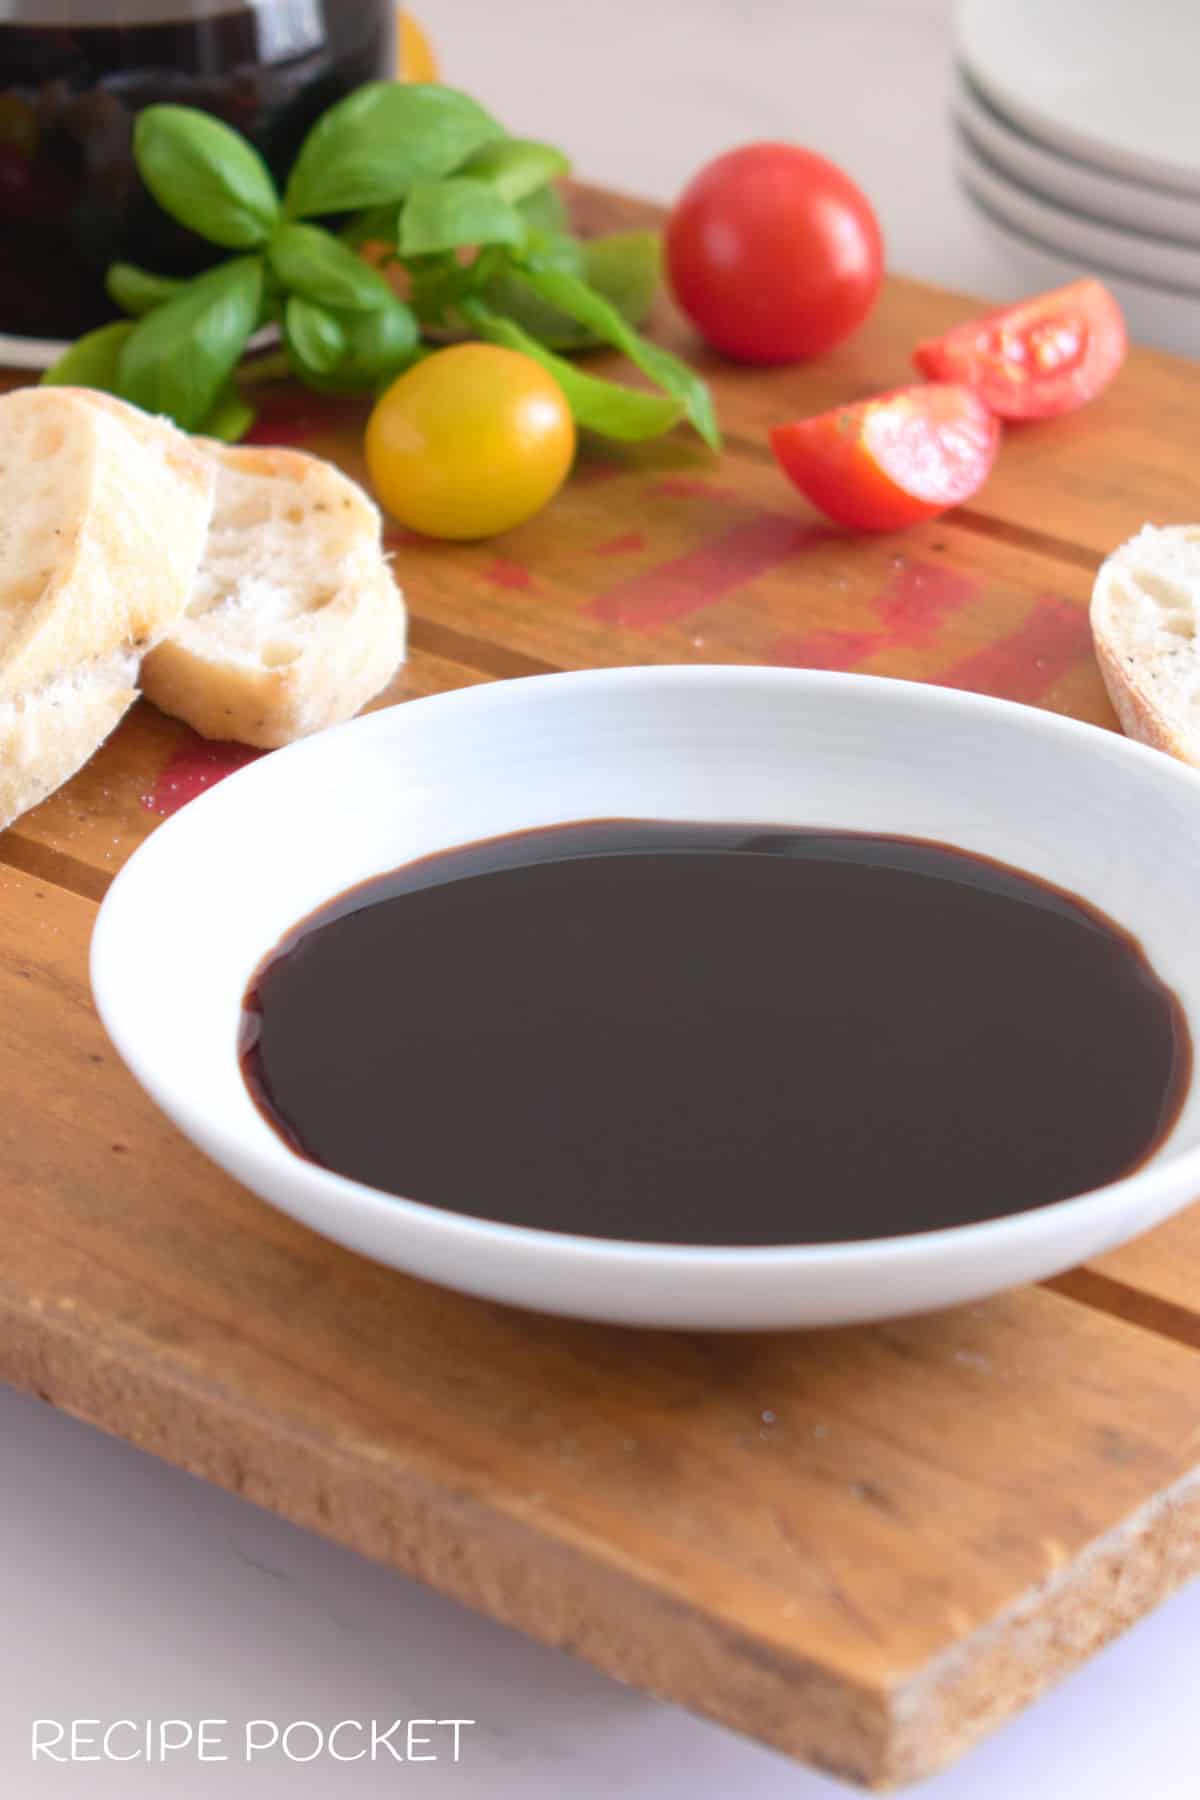 Balsamic vinegar glaze in a white bowl with bread and tomatoes in the background.